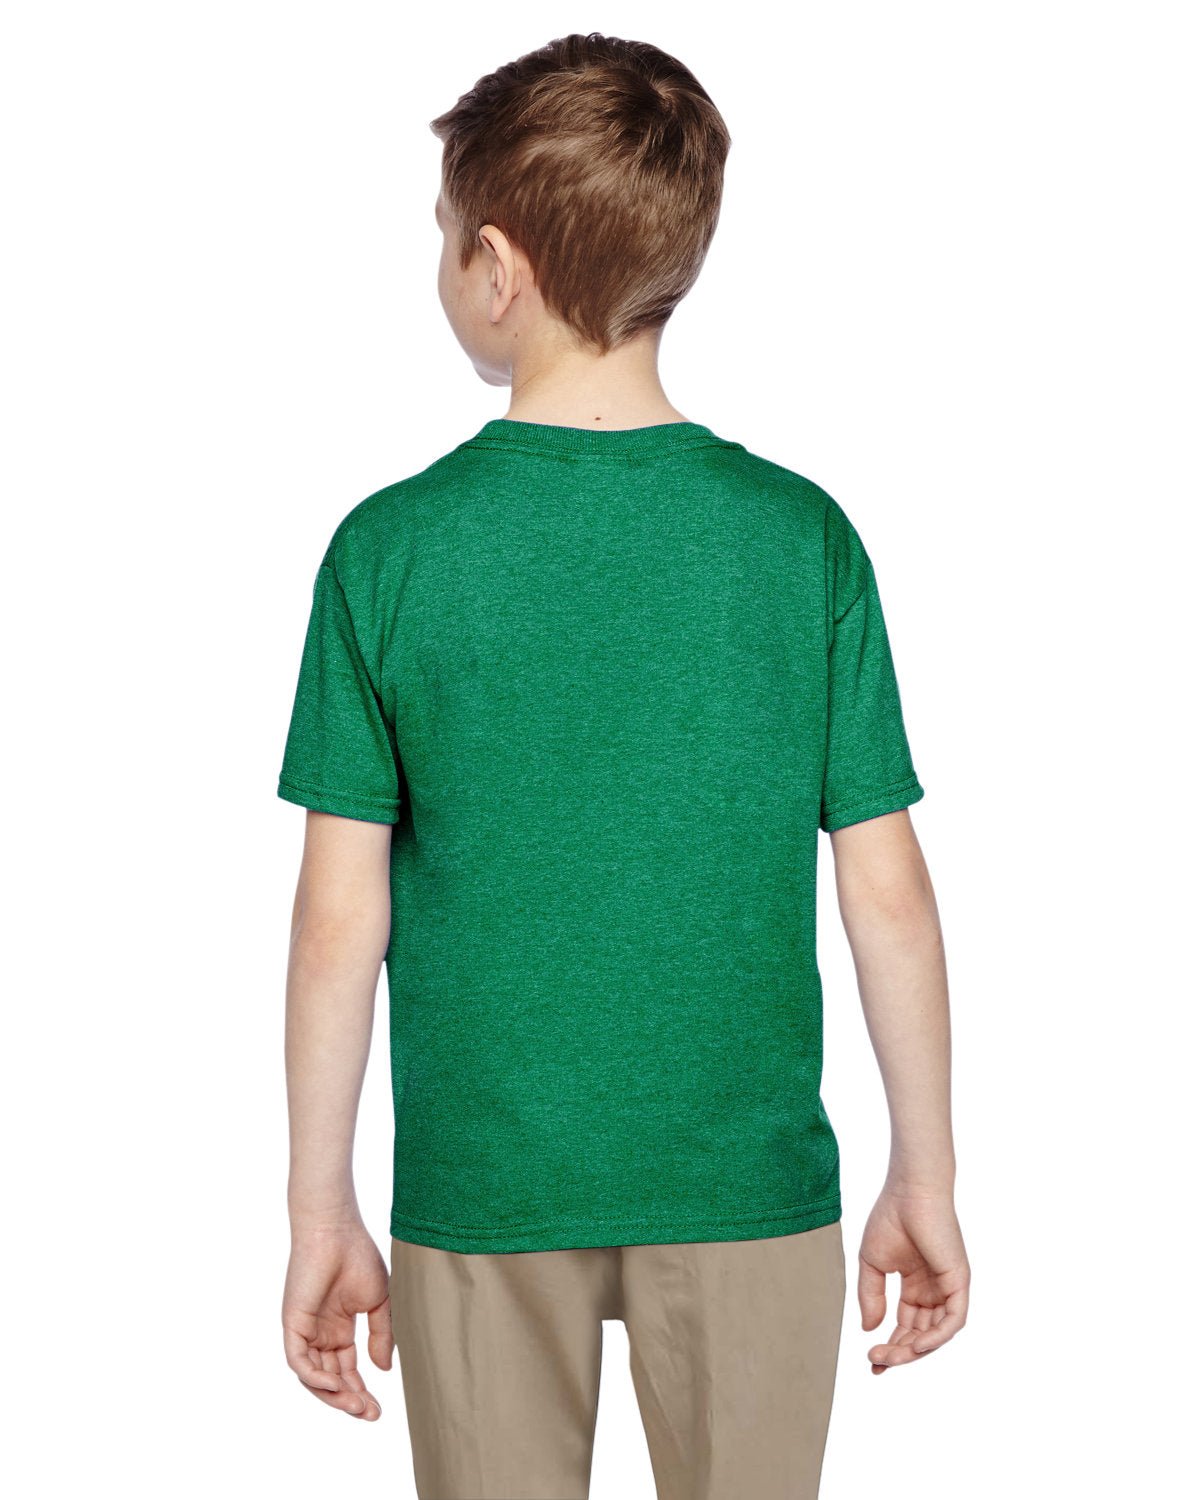 3931B-Fruit of the Loom-RETRO HTH GREEN-Fruit of the Loom-T-Shirts-2